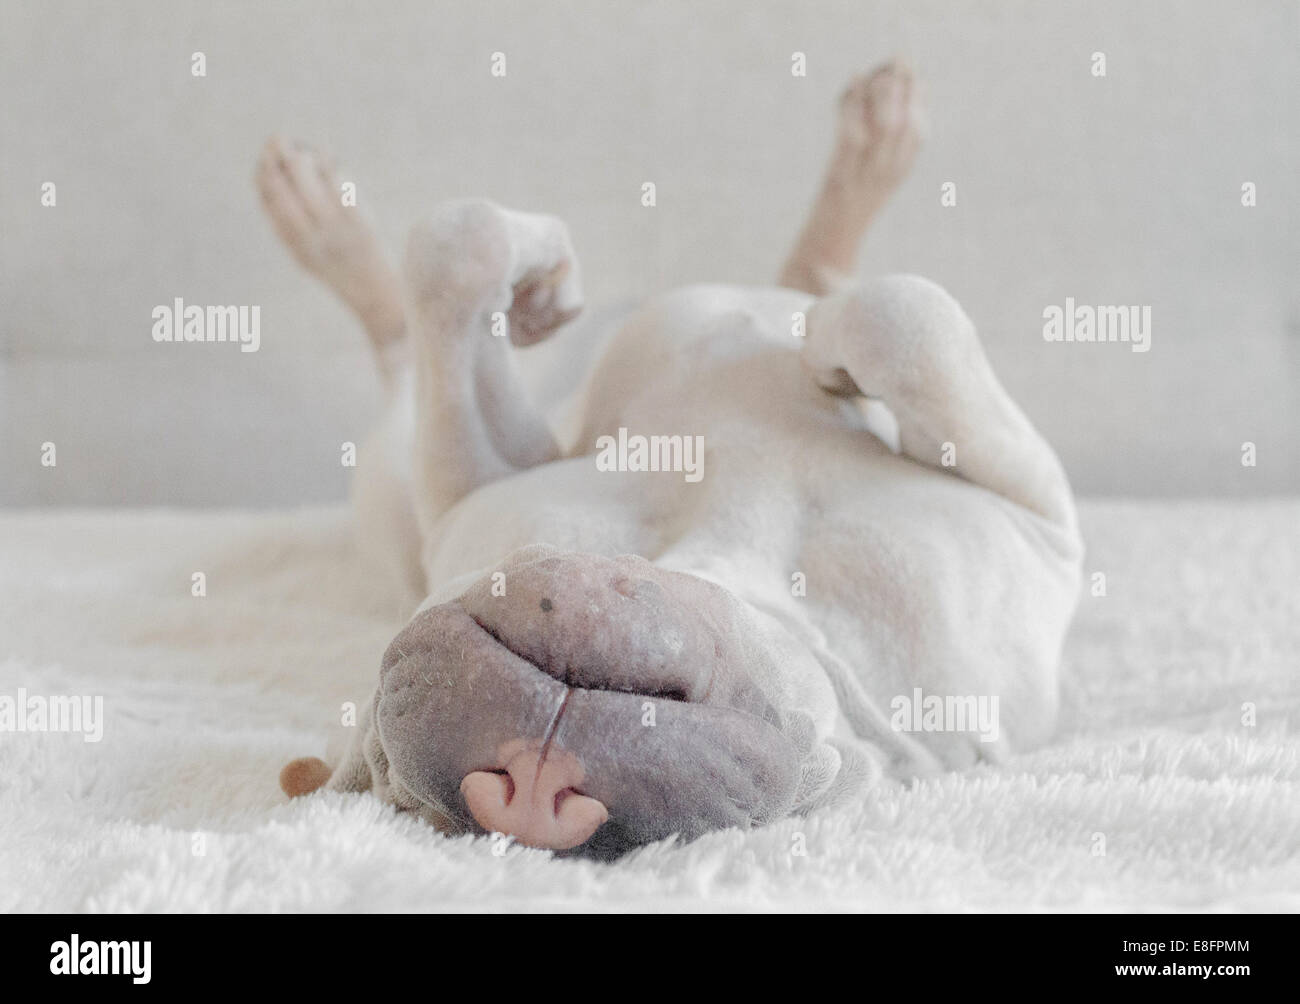 Shar pei puppy sleeping upside down on a bed Stock Photo